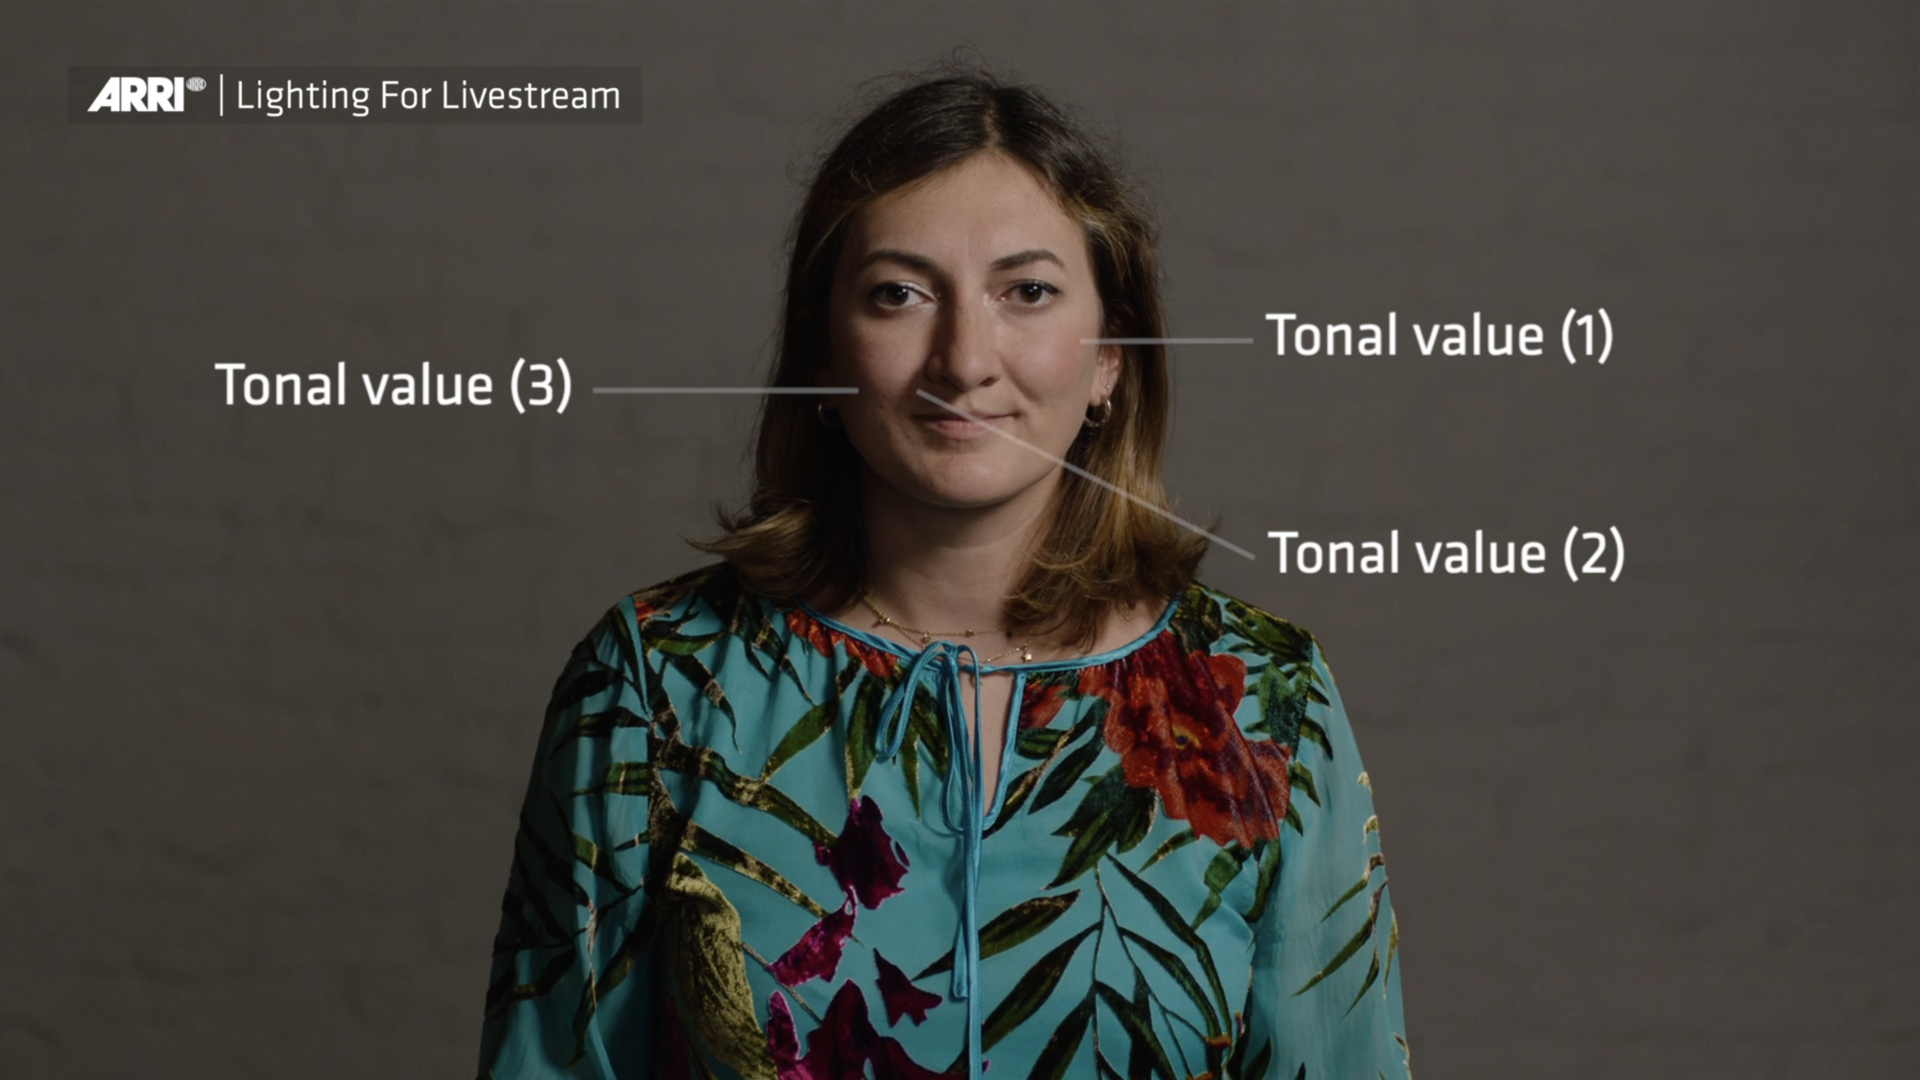 How to light faces for livestream - different tonal values